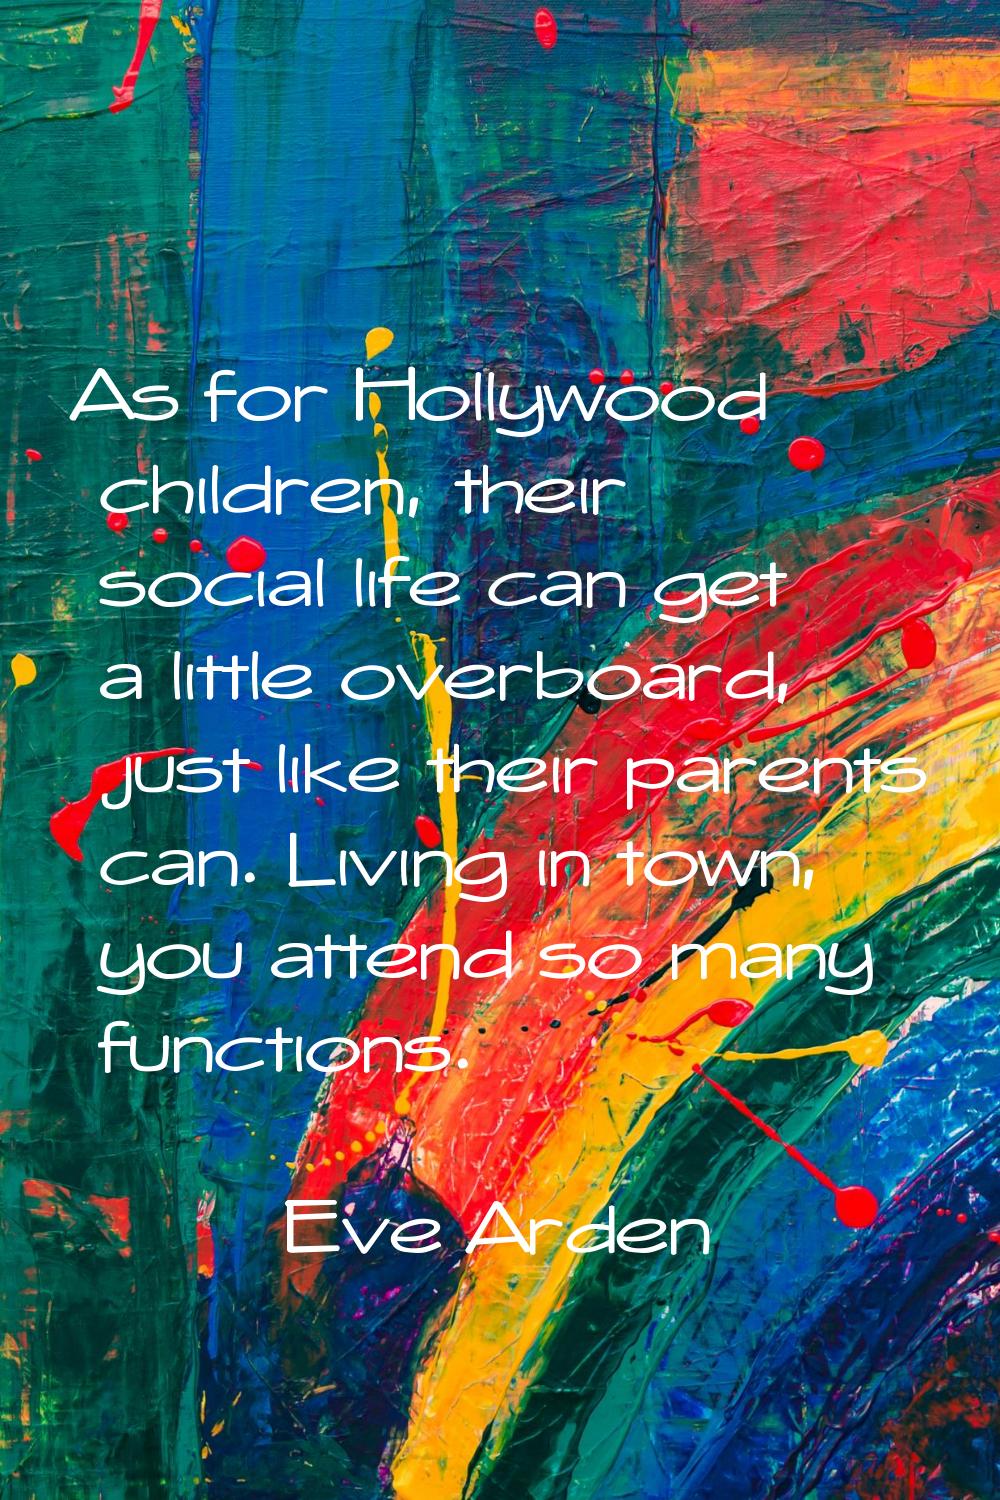 As for Hollywood children, their social life can get a little overboard, just like their parents ca